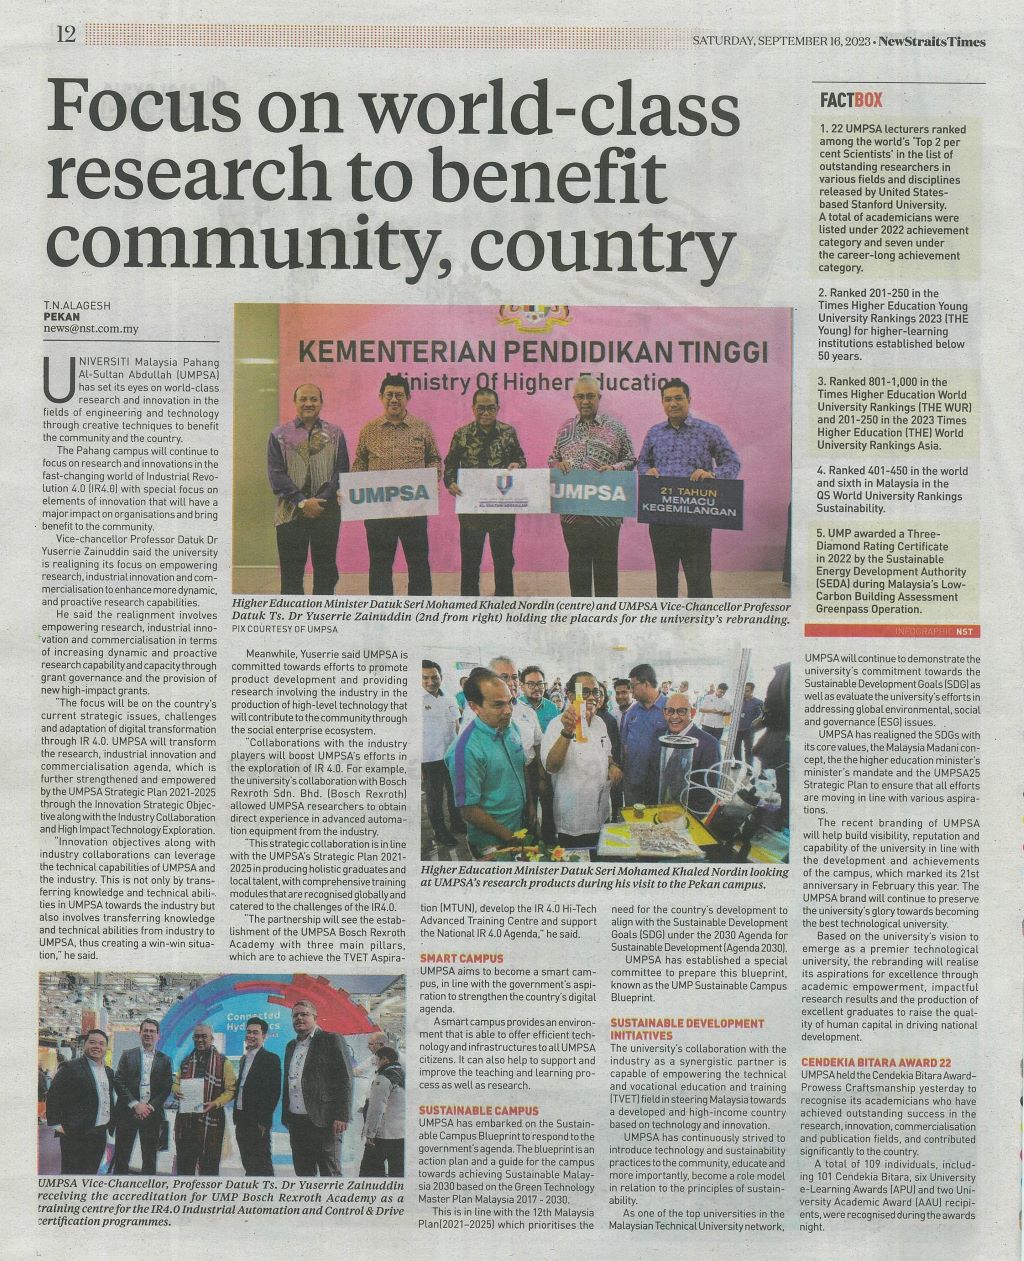 Focus on world-class research to benefit community, country